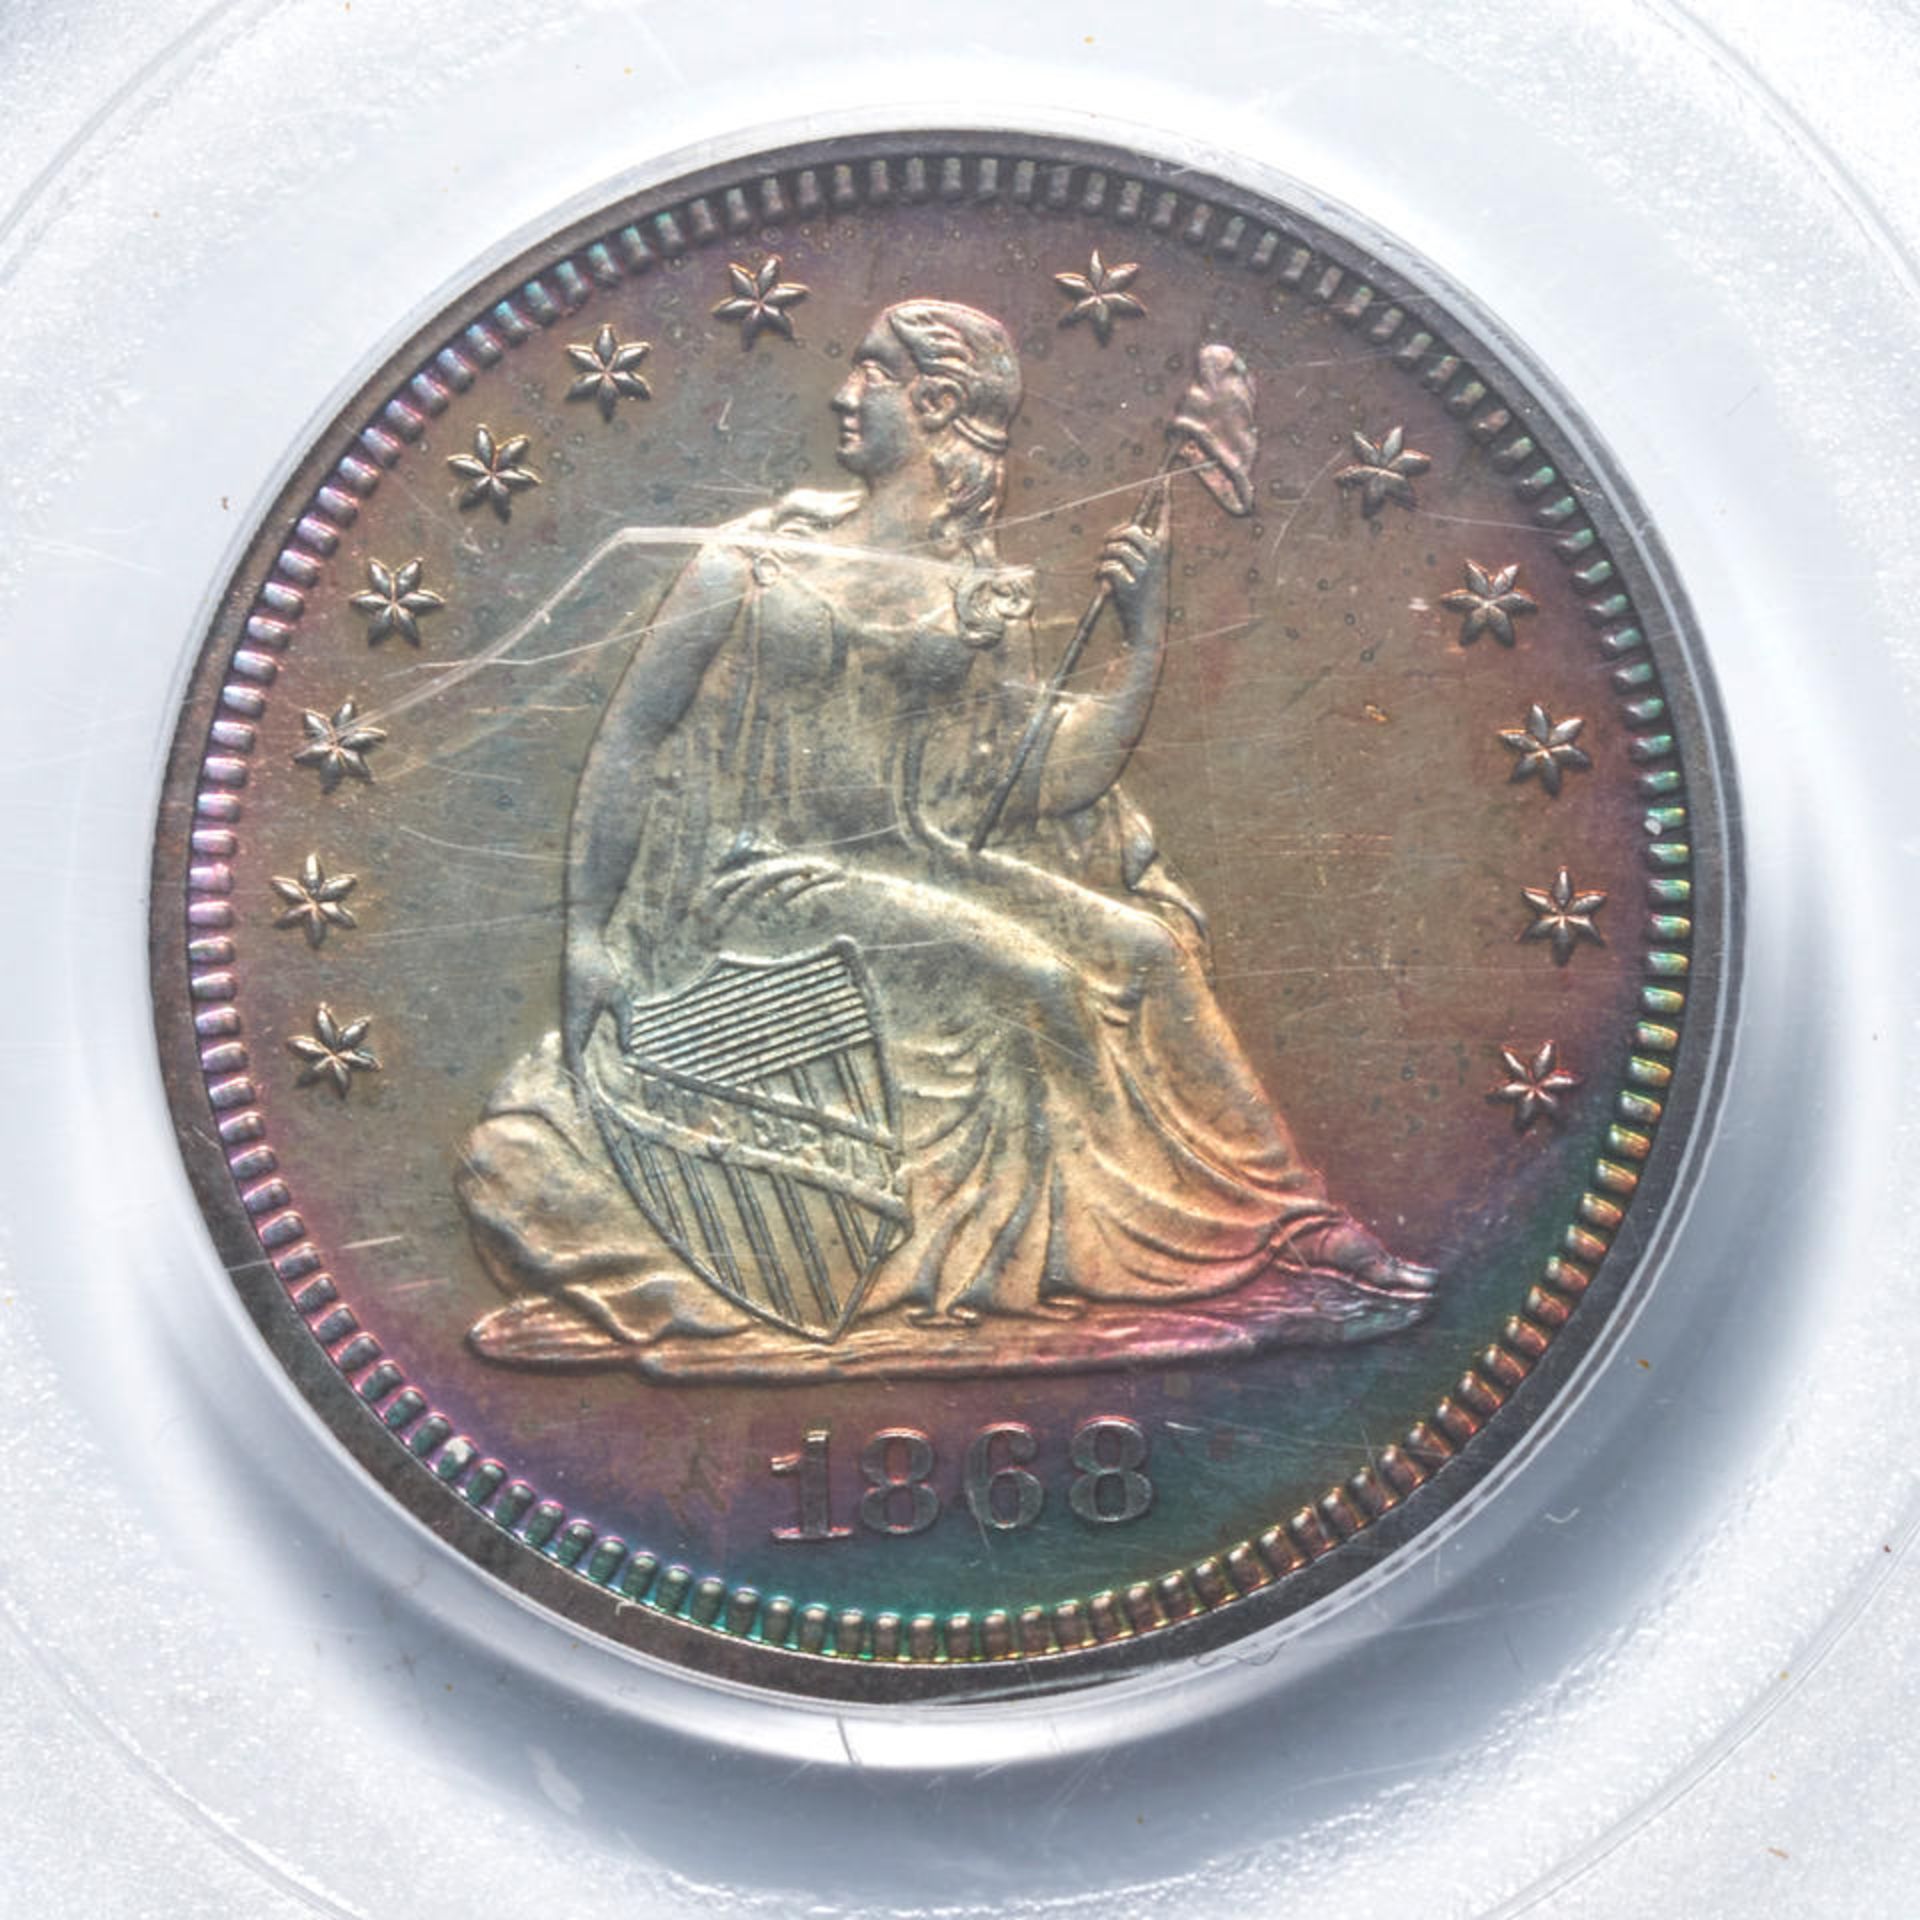 United States Proof 1868 Seated Liberty Quarter. - Image 3 of 3